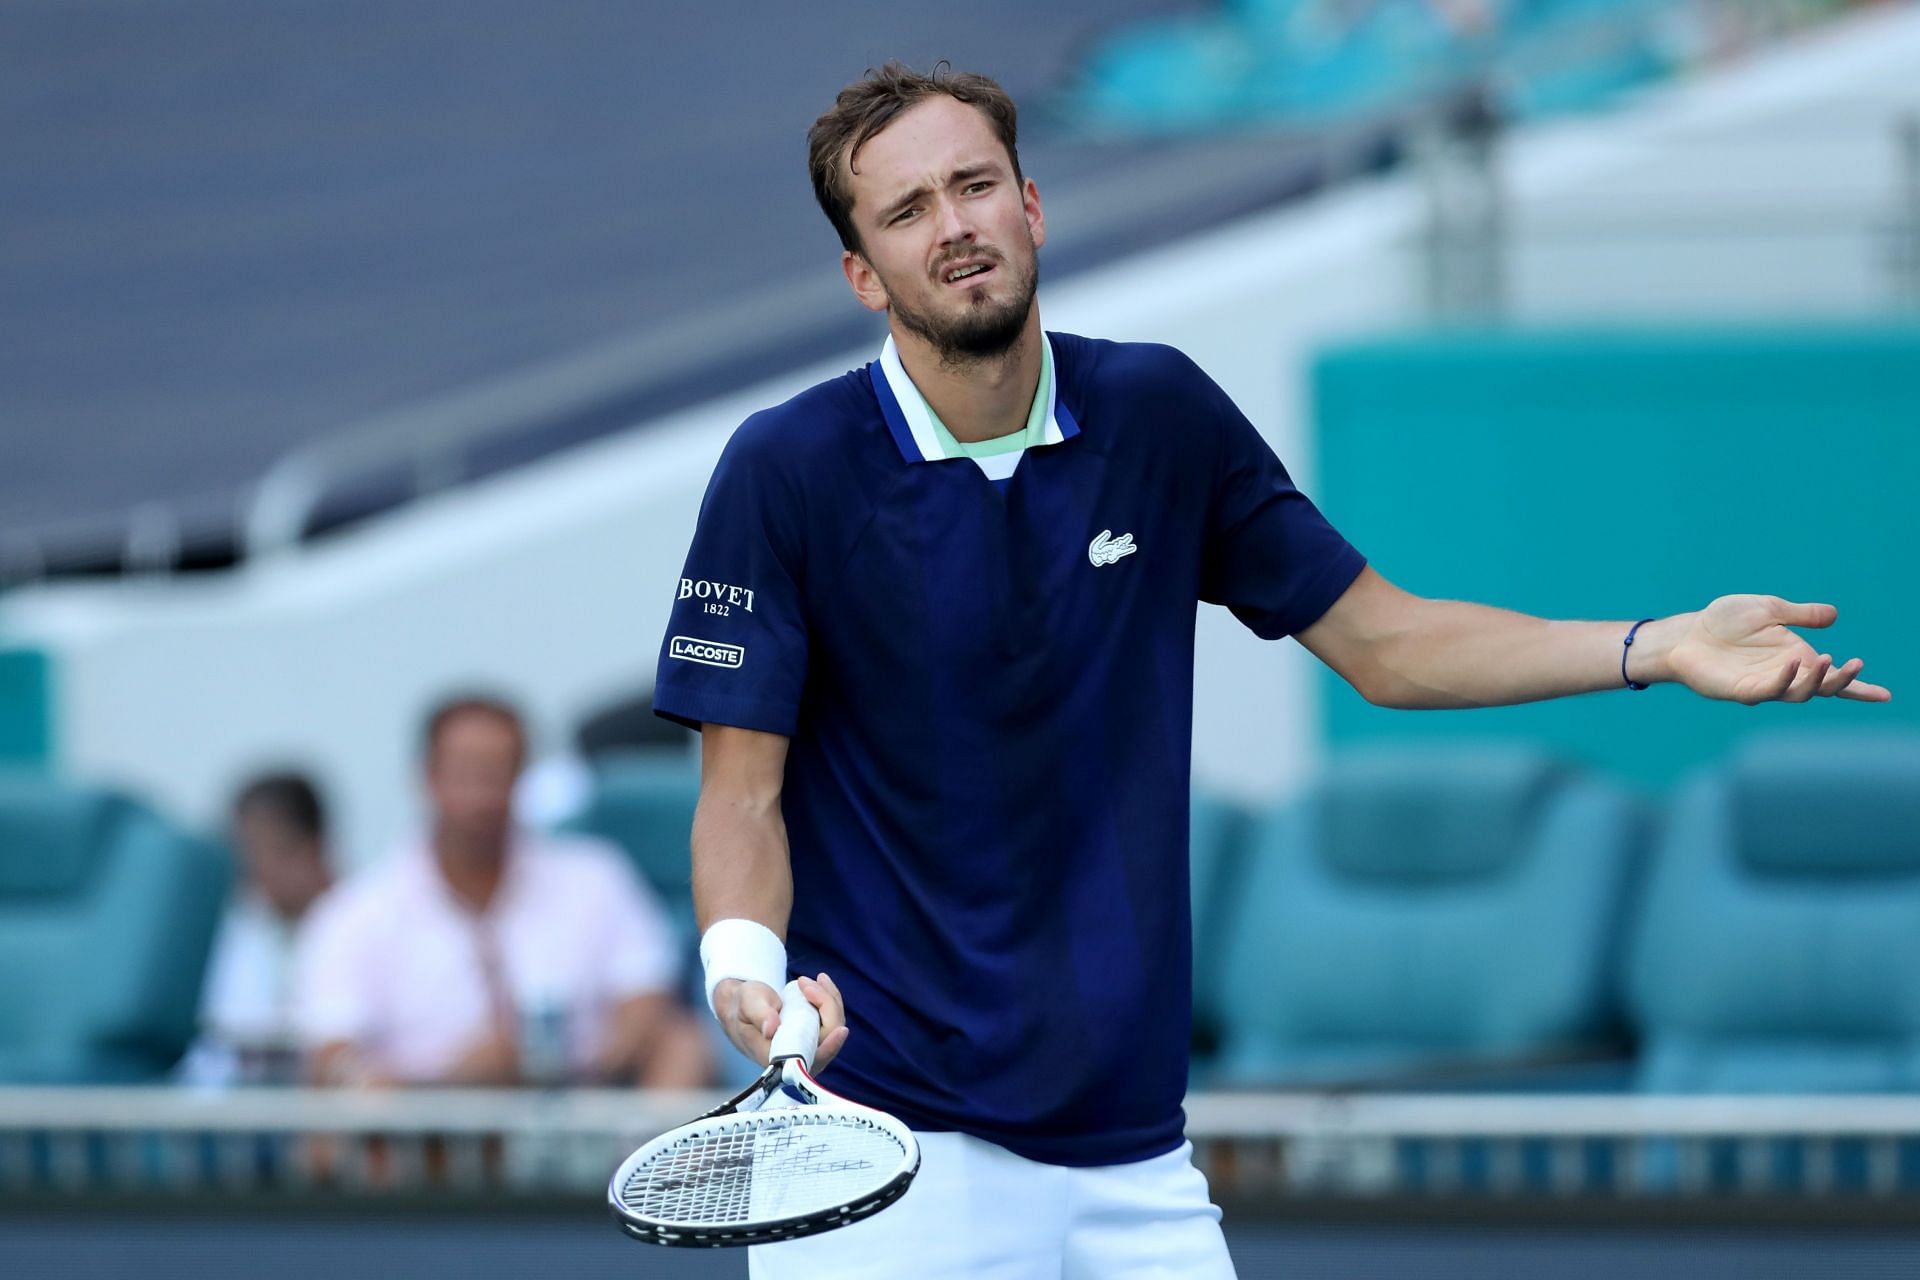 Daniil Medvedev booked his place in the quarterfinals of the Miami Open